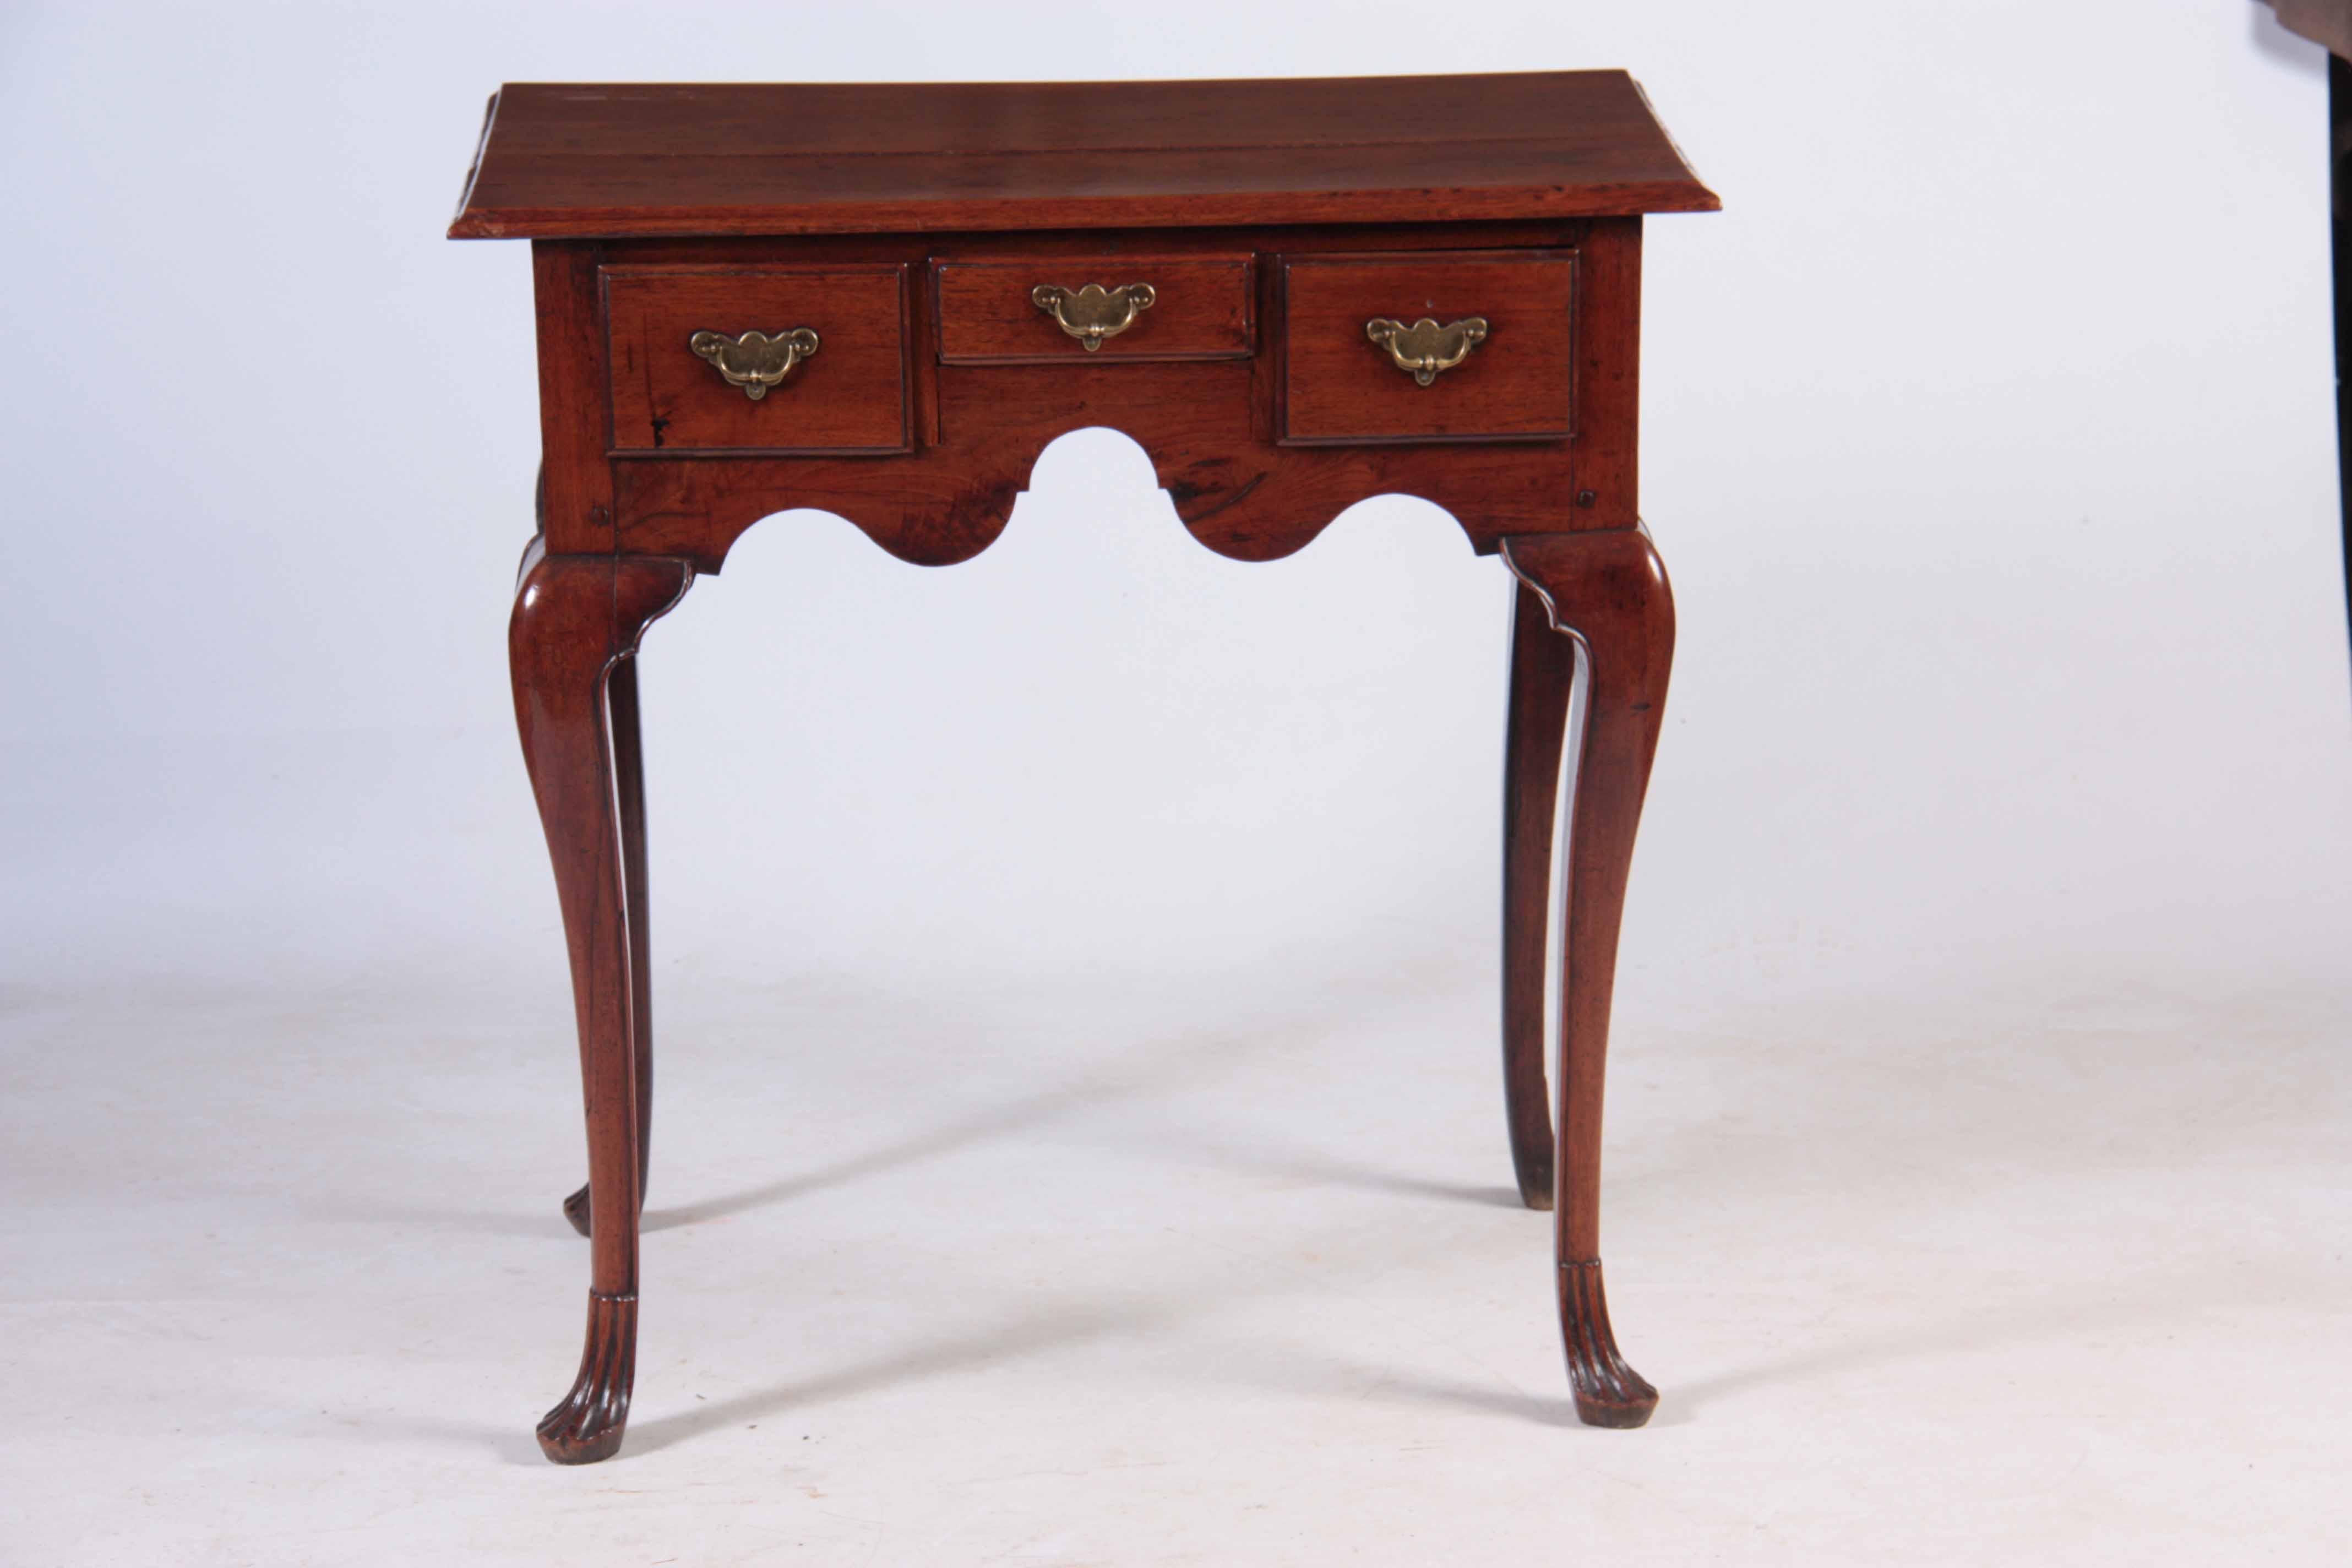 AN UNUSUAL SOLID WALNUT EARLY 18TH CENTURY LOWBOY POSSIBLY AMERICAN with moulded edge top above - Image 8 of 8